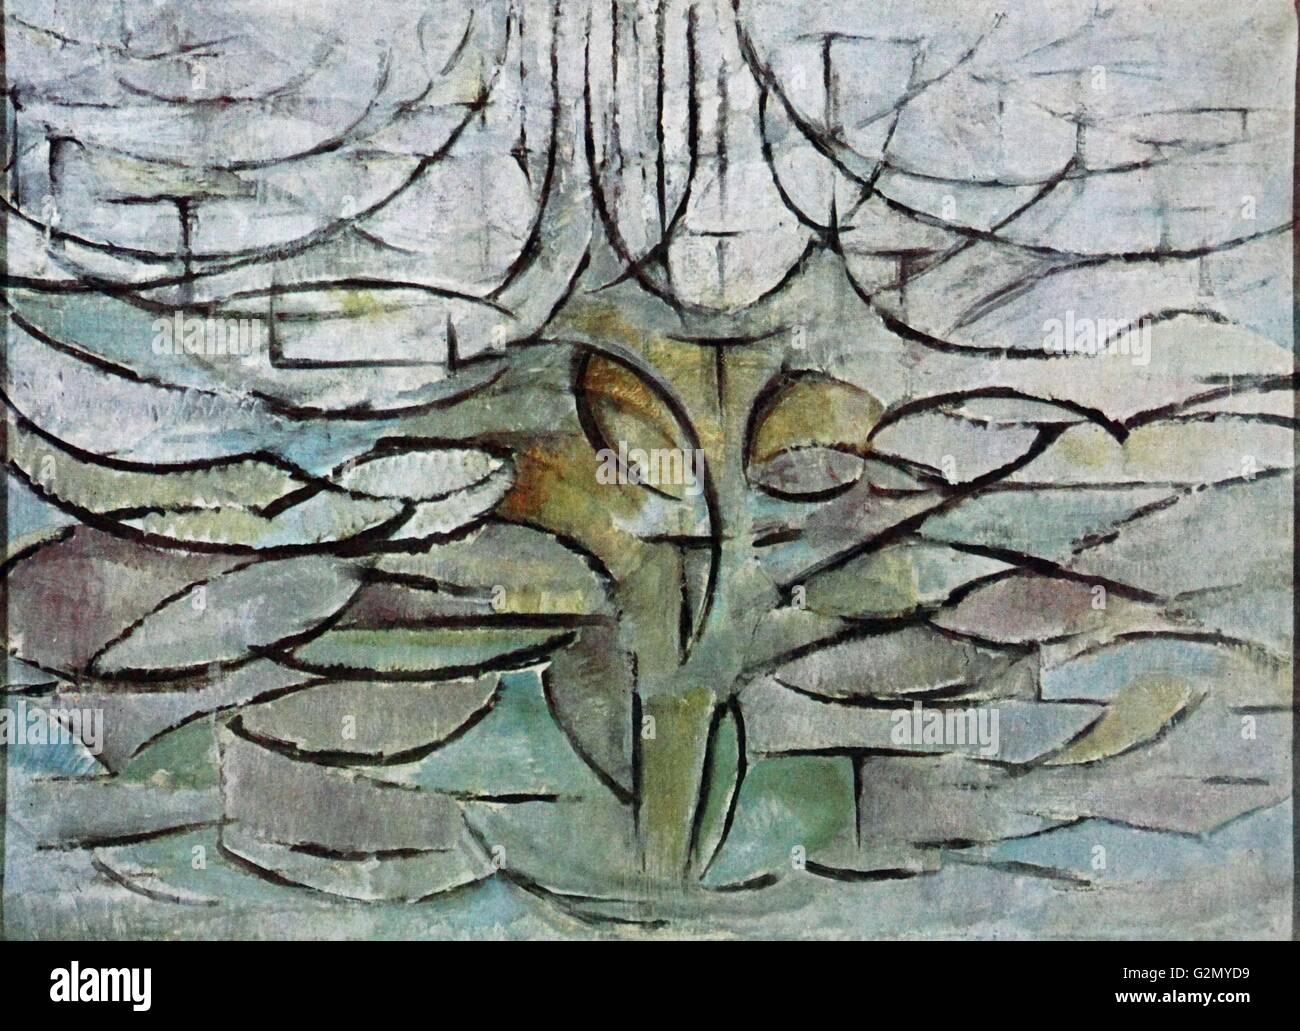 Painting by the famous Dutch artist Piet Mondrian (7th March 1872 - 1st February 1944), work titled 'Blooming apple tree' Painted in 1912 Stock Photo